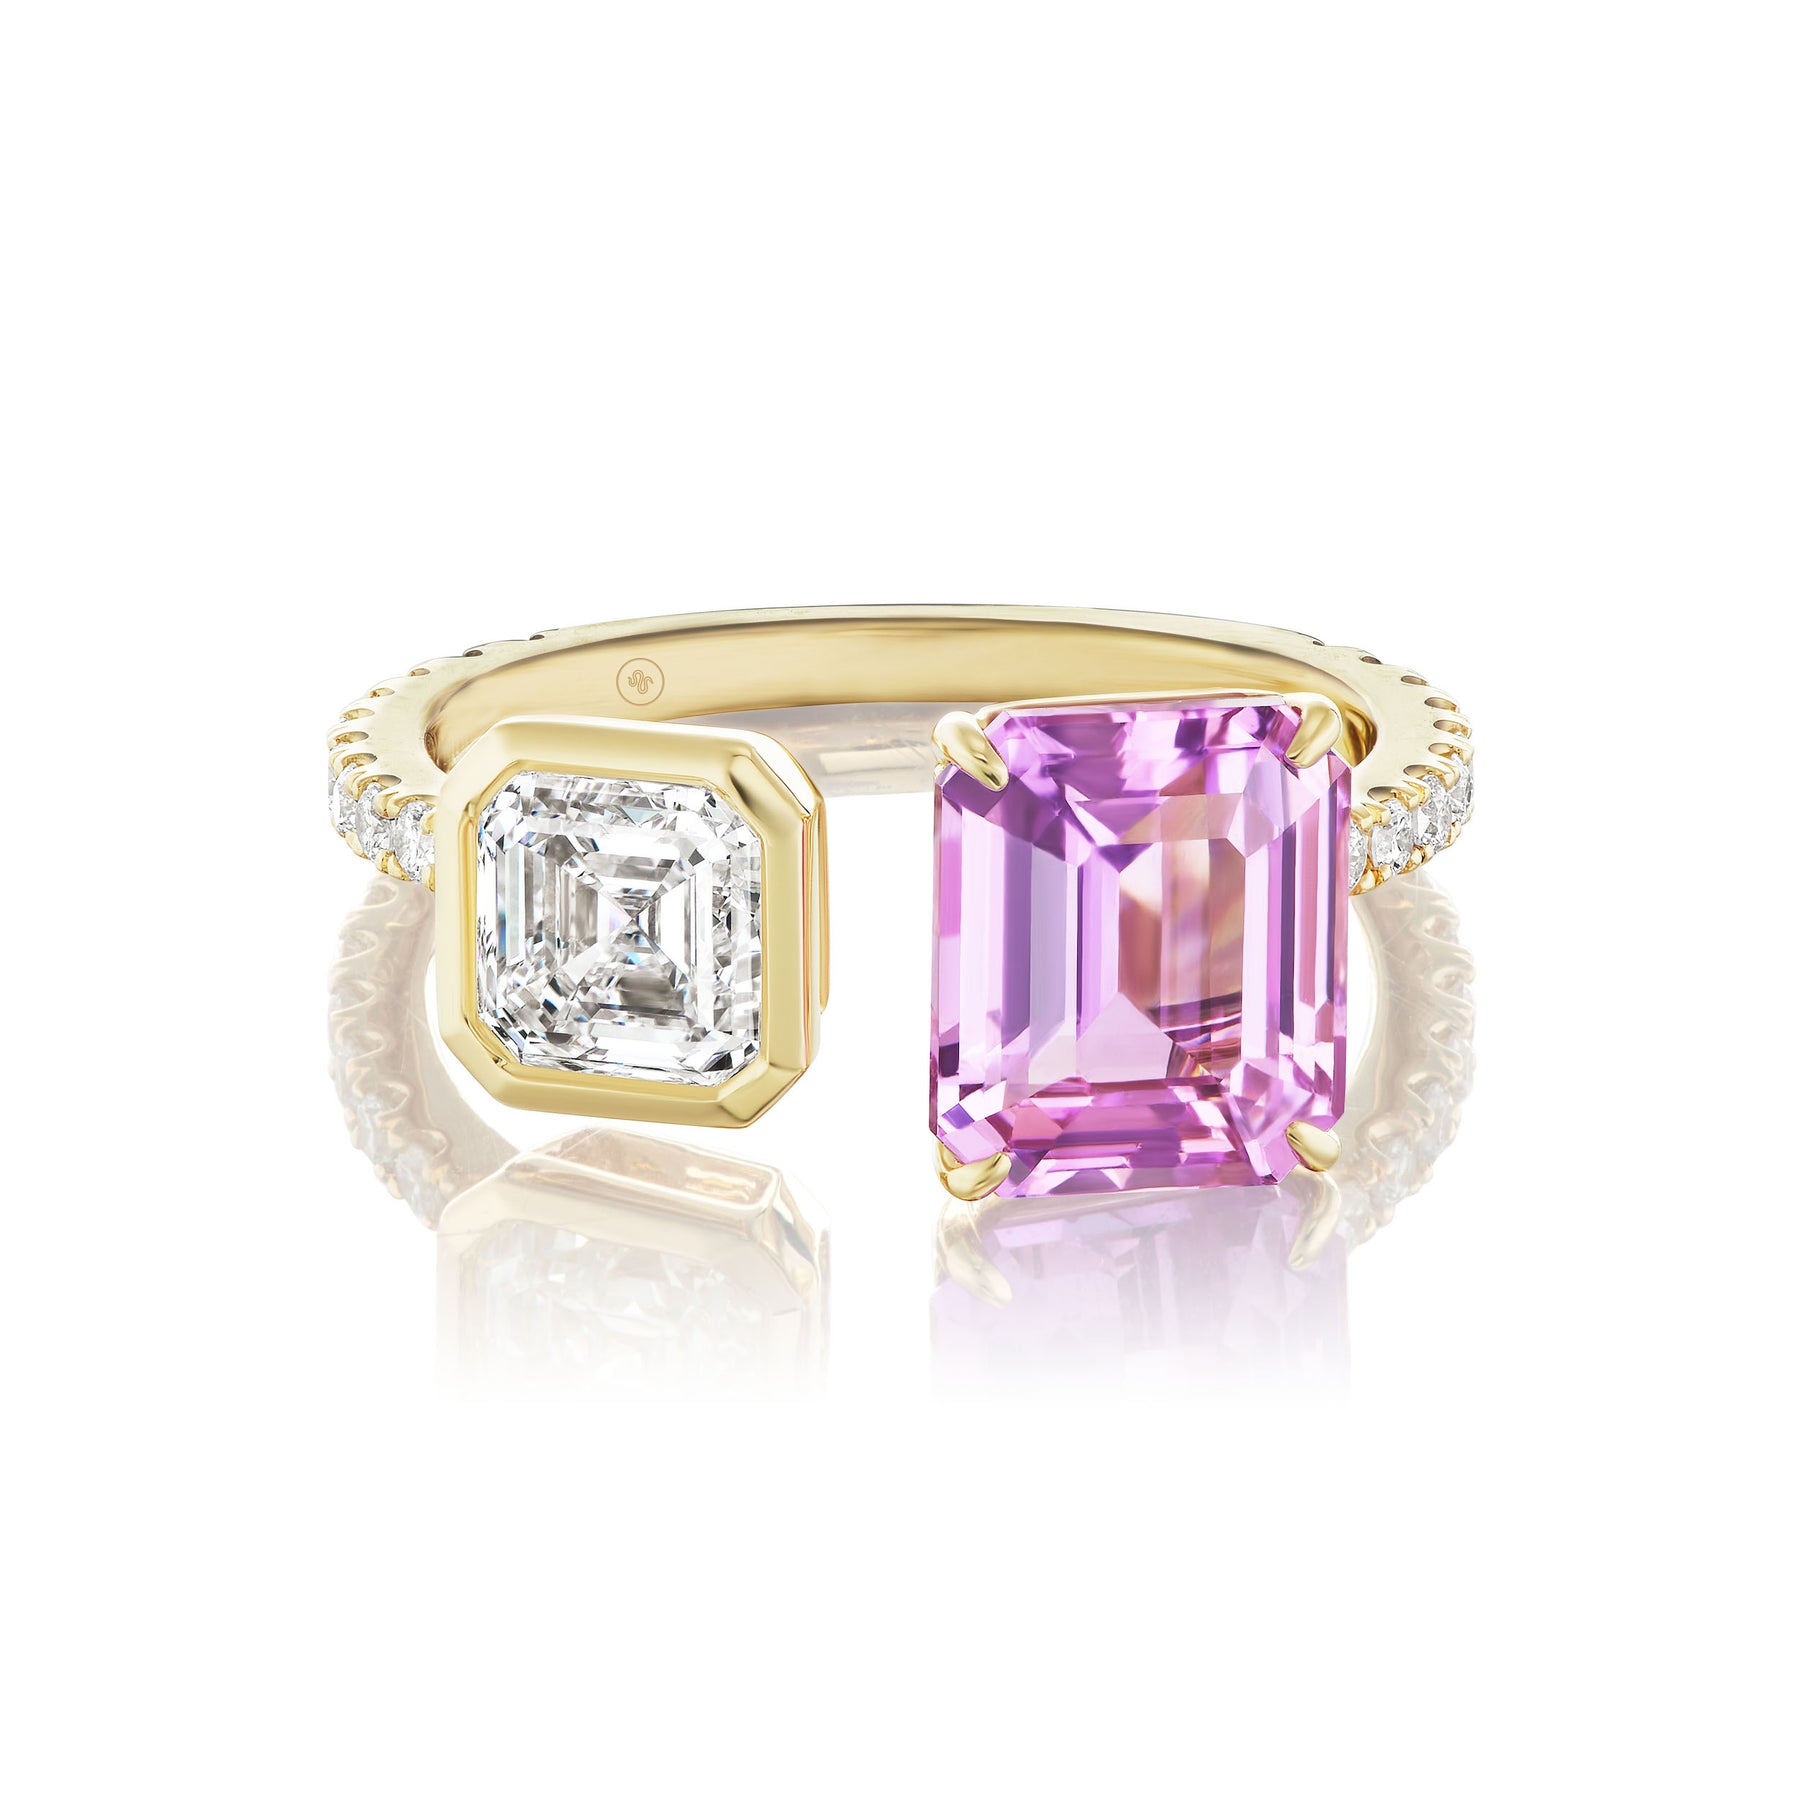 Toi et Moi Pavé Ring with Square Emerald Cut Diamond and Pink Emerald Cut Sapphire